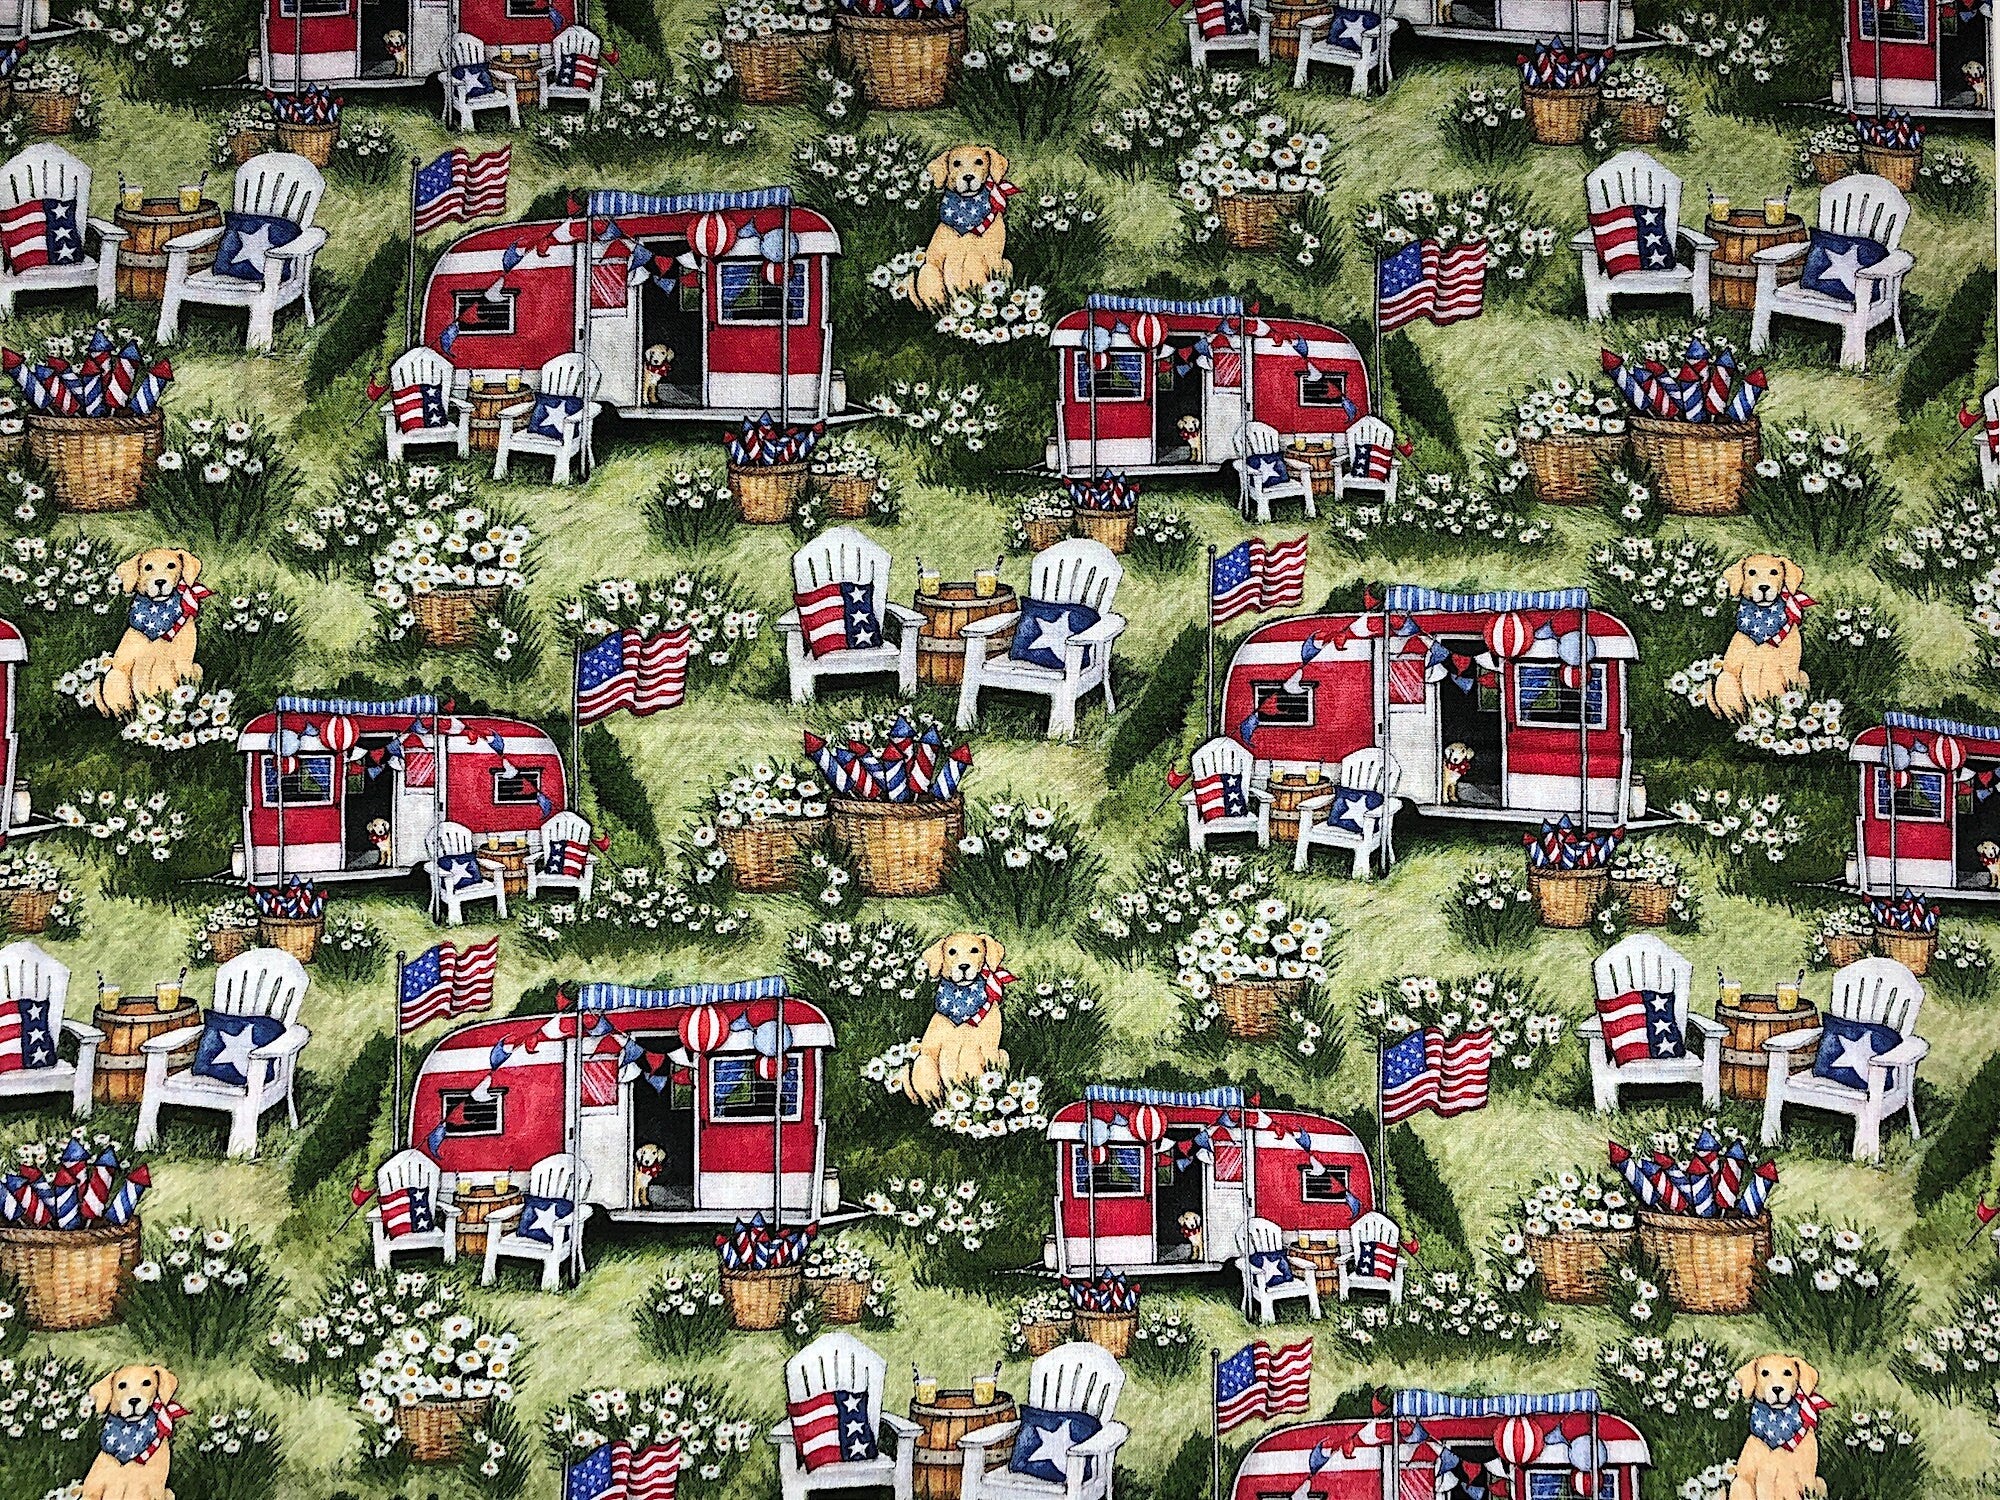 This patriotic fabric is covered with pots of flowers, dogs, chairs and travel trailers.